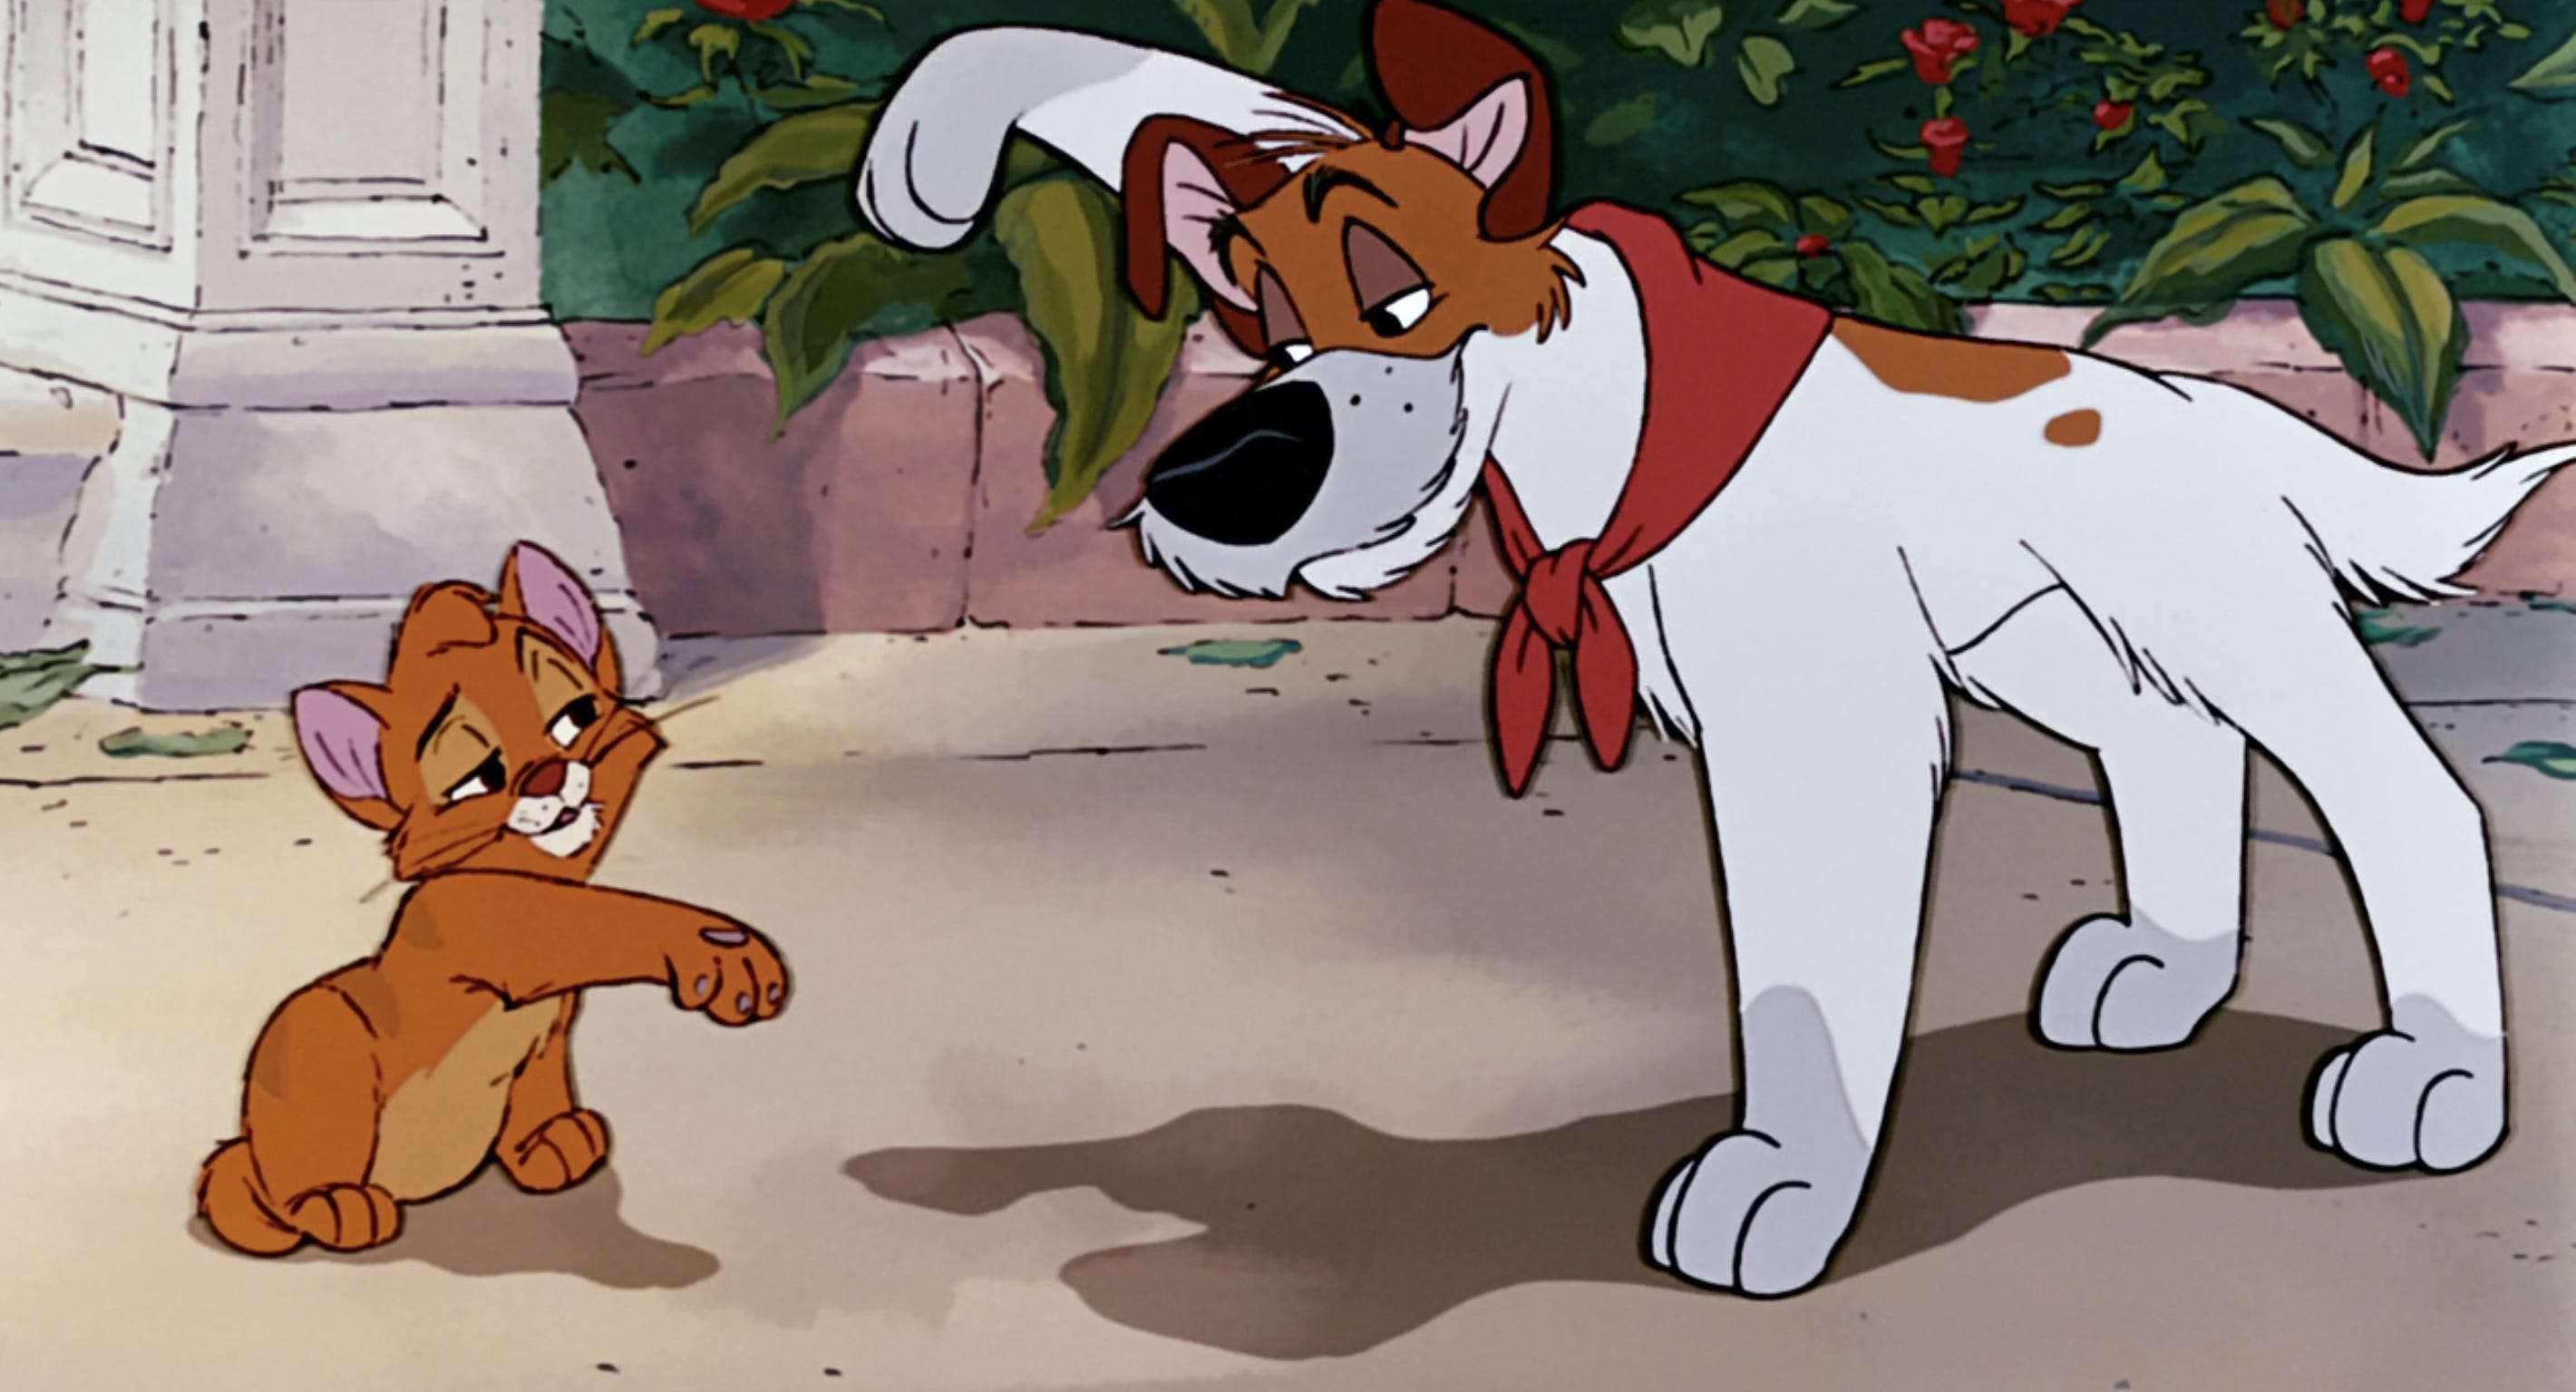 12 of the best underrated animated movies on Disney Plus you can watch